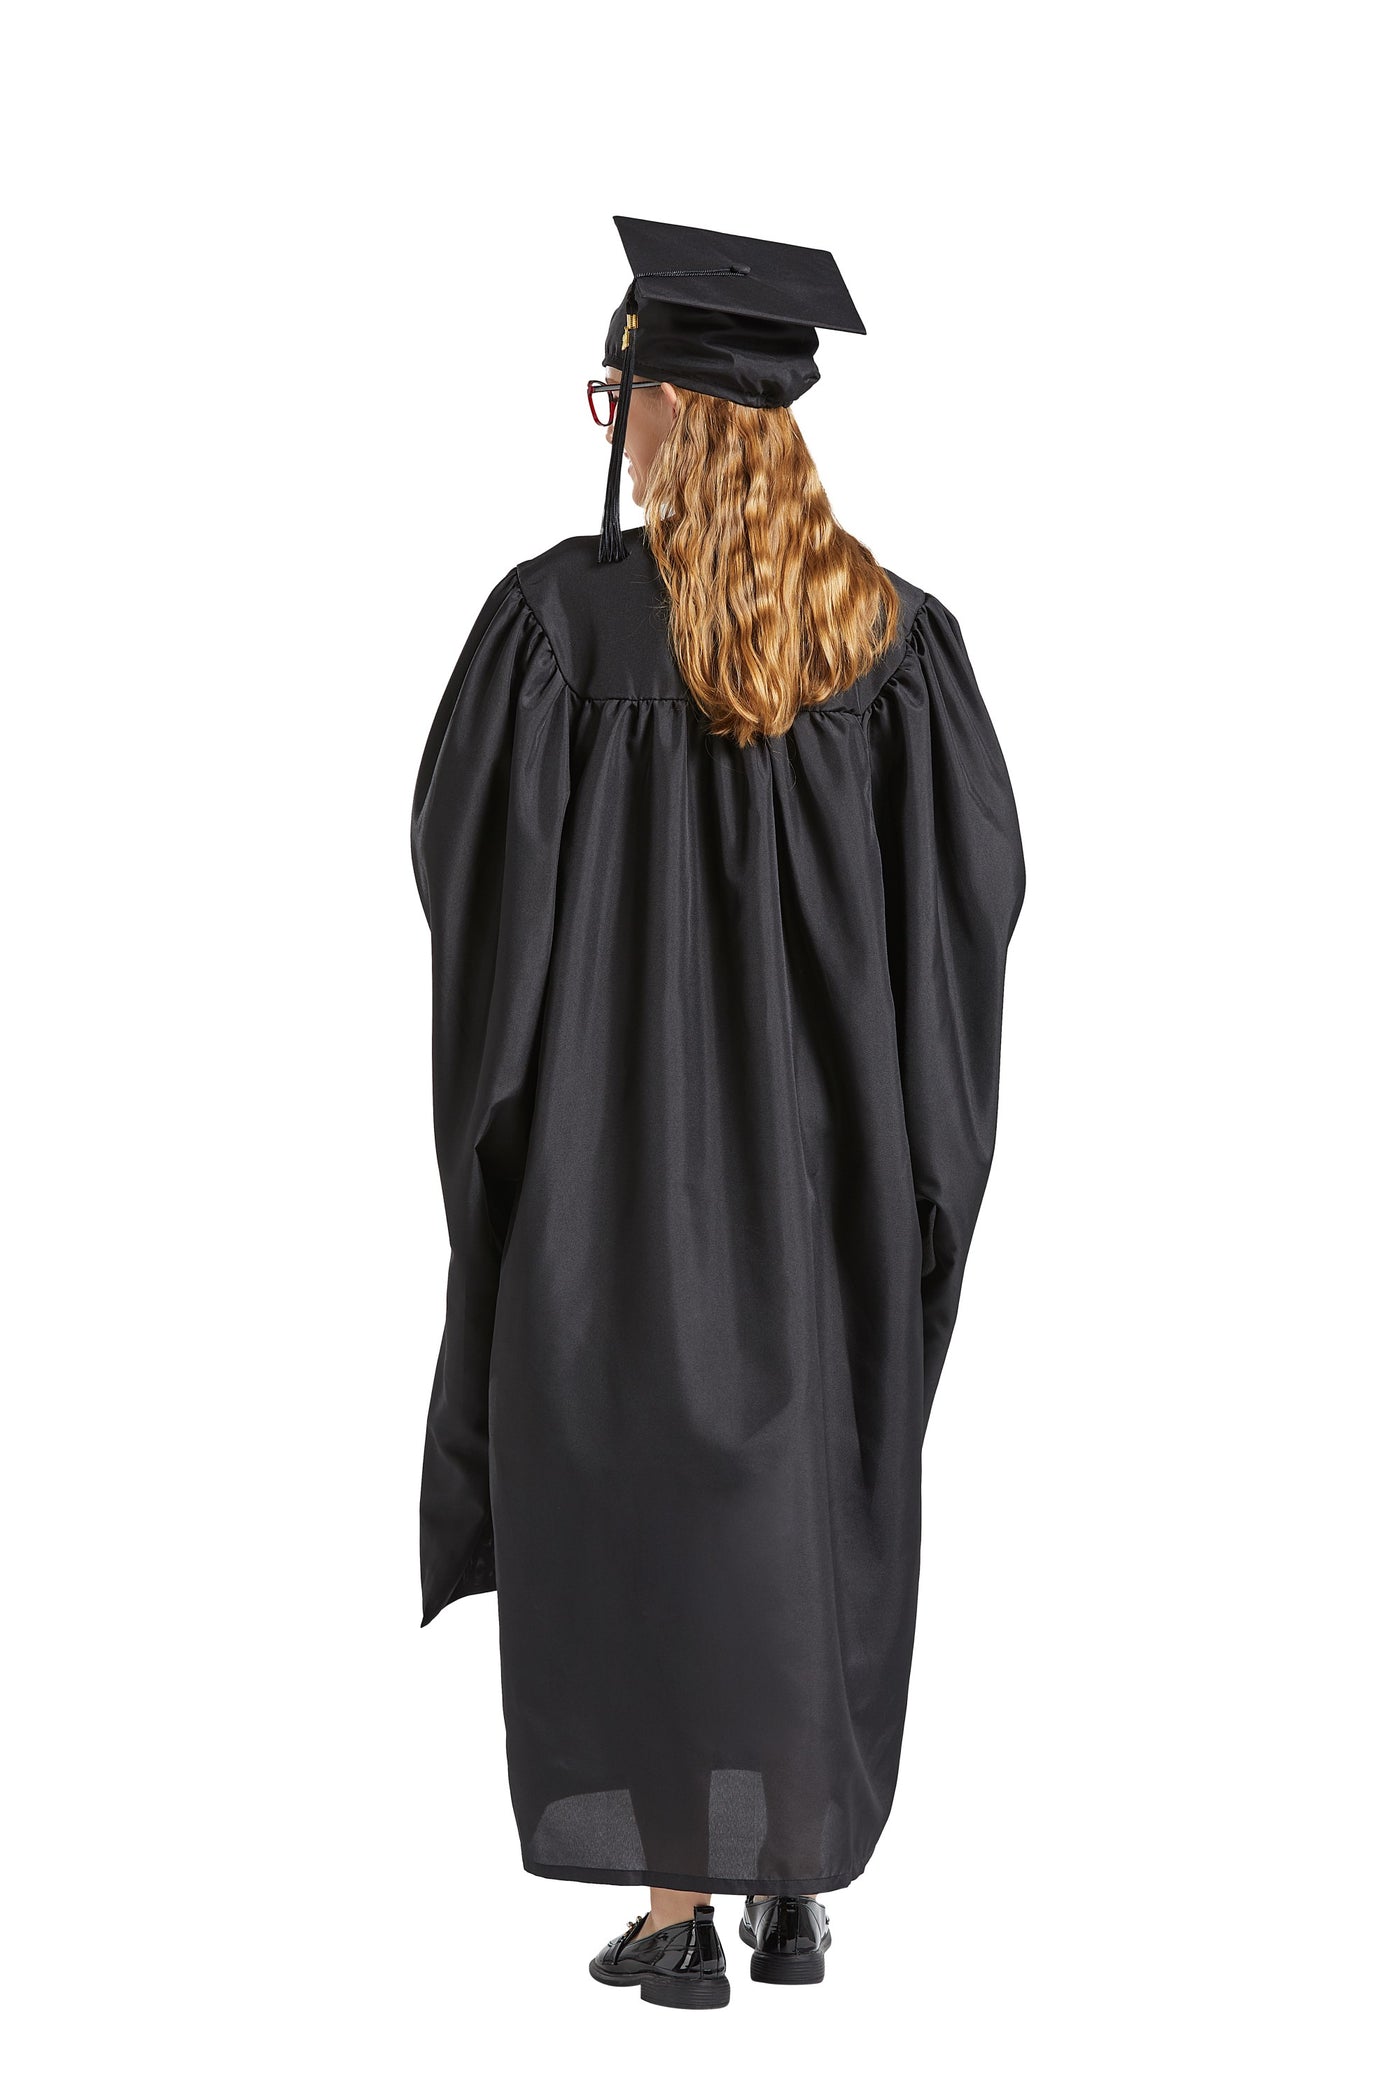 A woman in a graduation gown holding up a black graduation hat photo – Free  Person Image on Unsplash